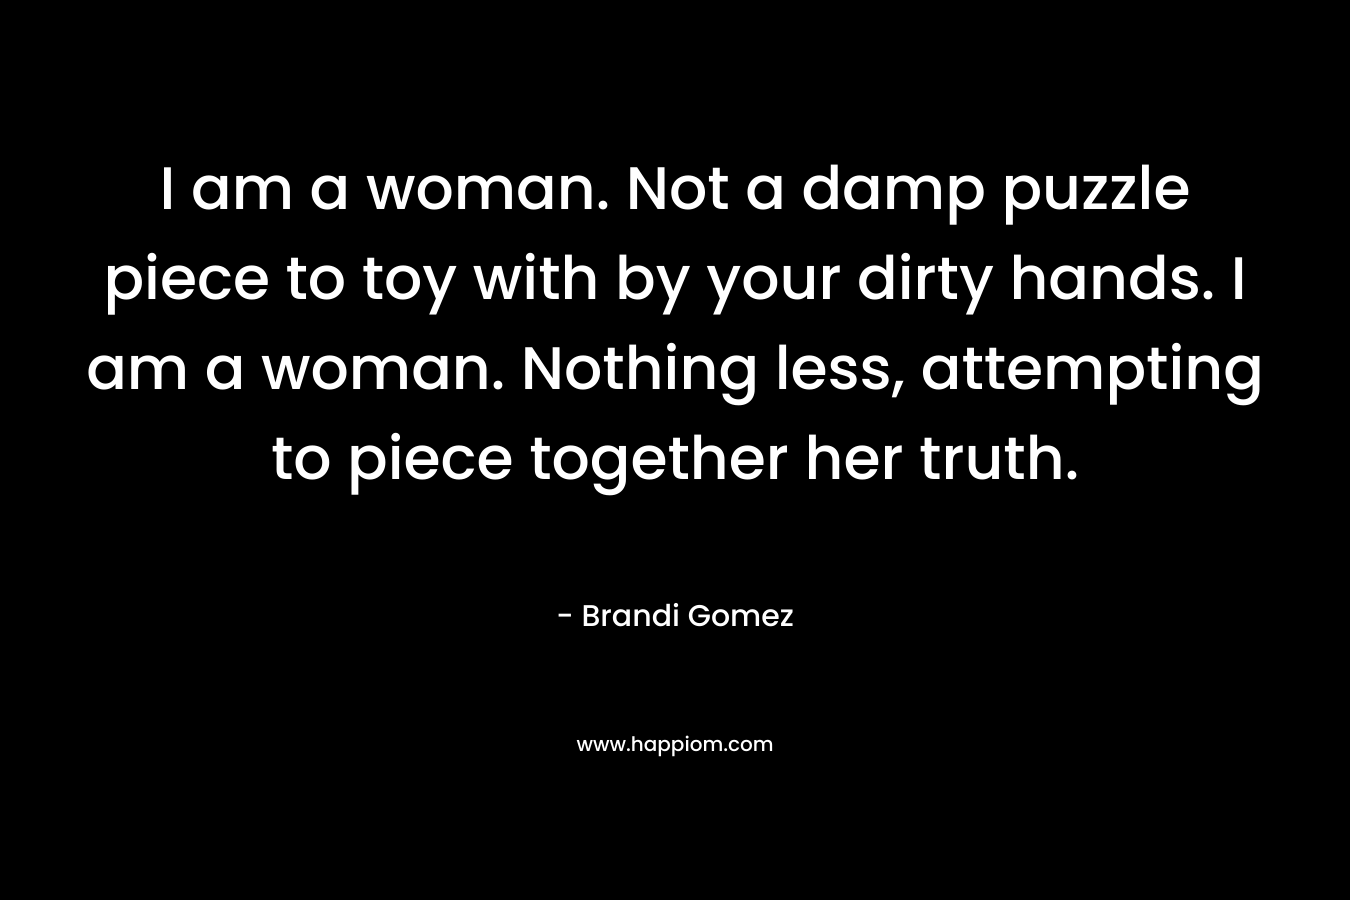 I am a woman. Not a damp puzzle piece to toy with by your dirty hands. I am a woman. Nothing less, attempting to piece together her truth.